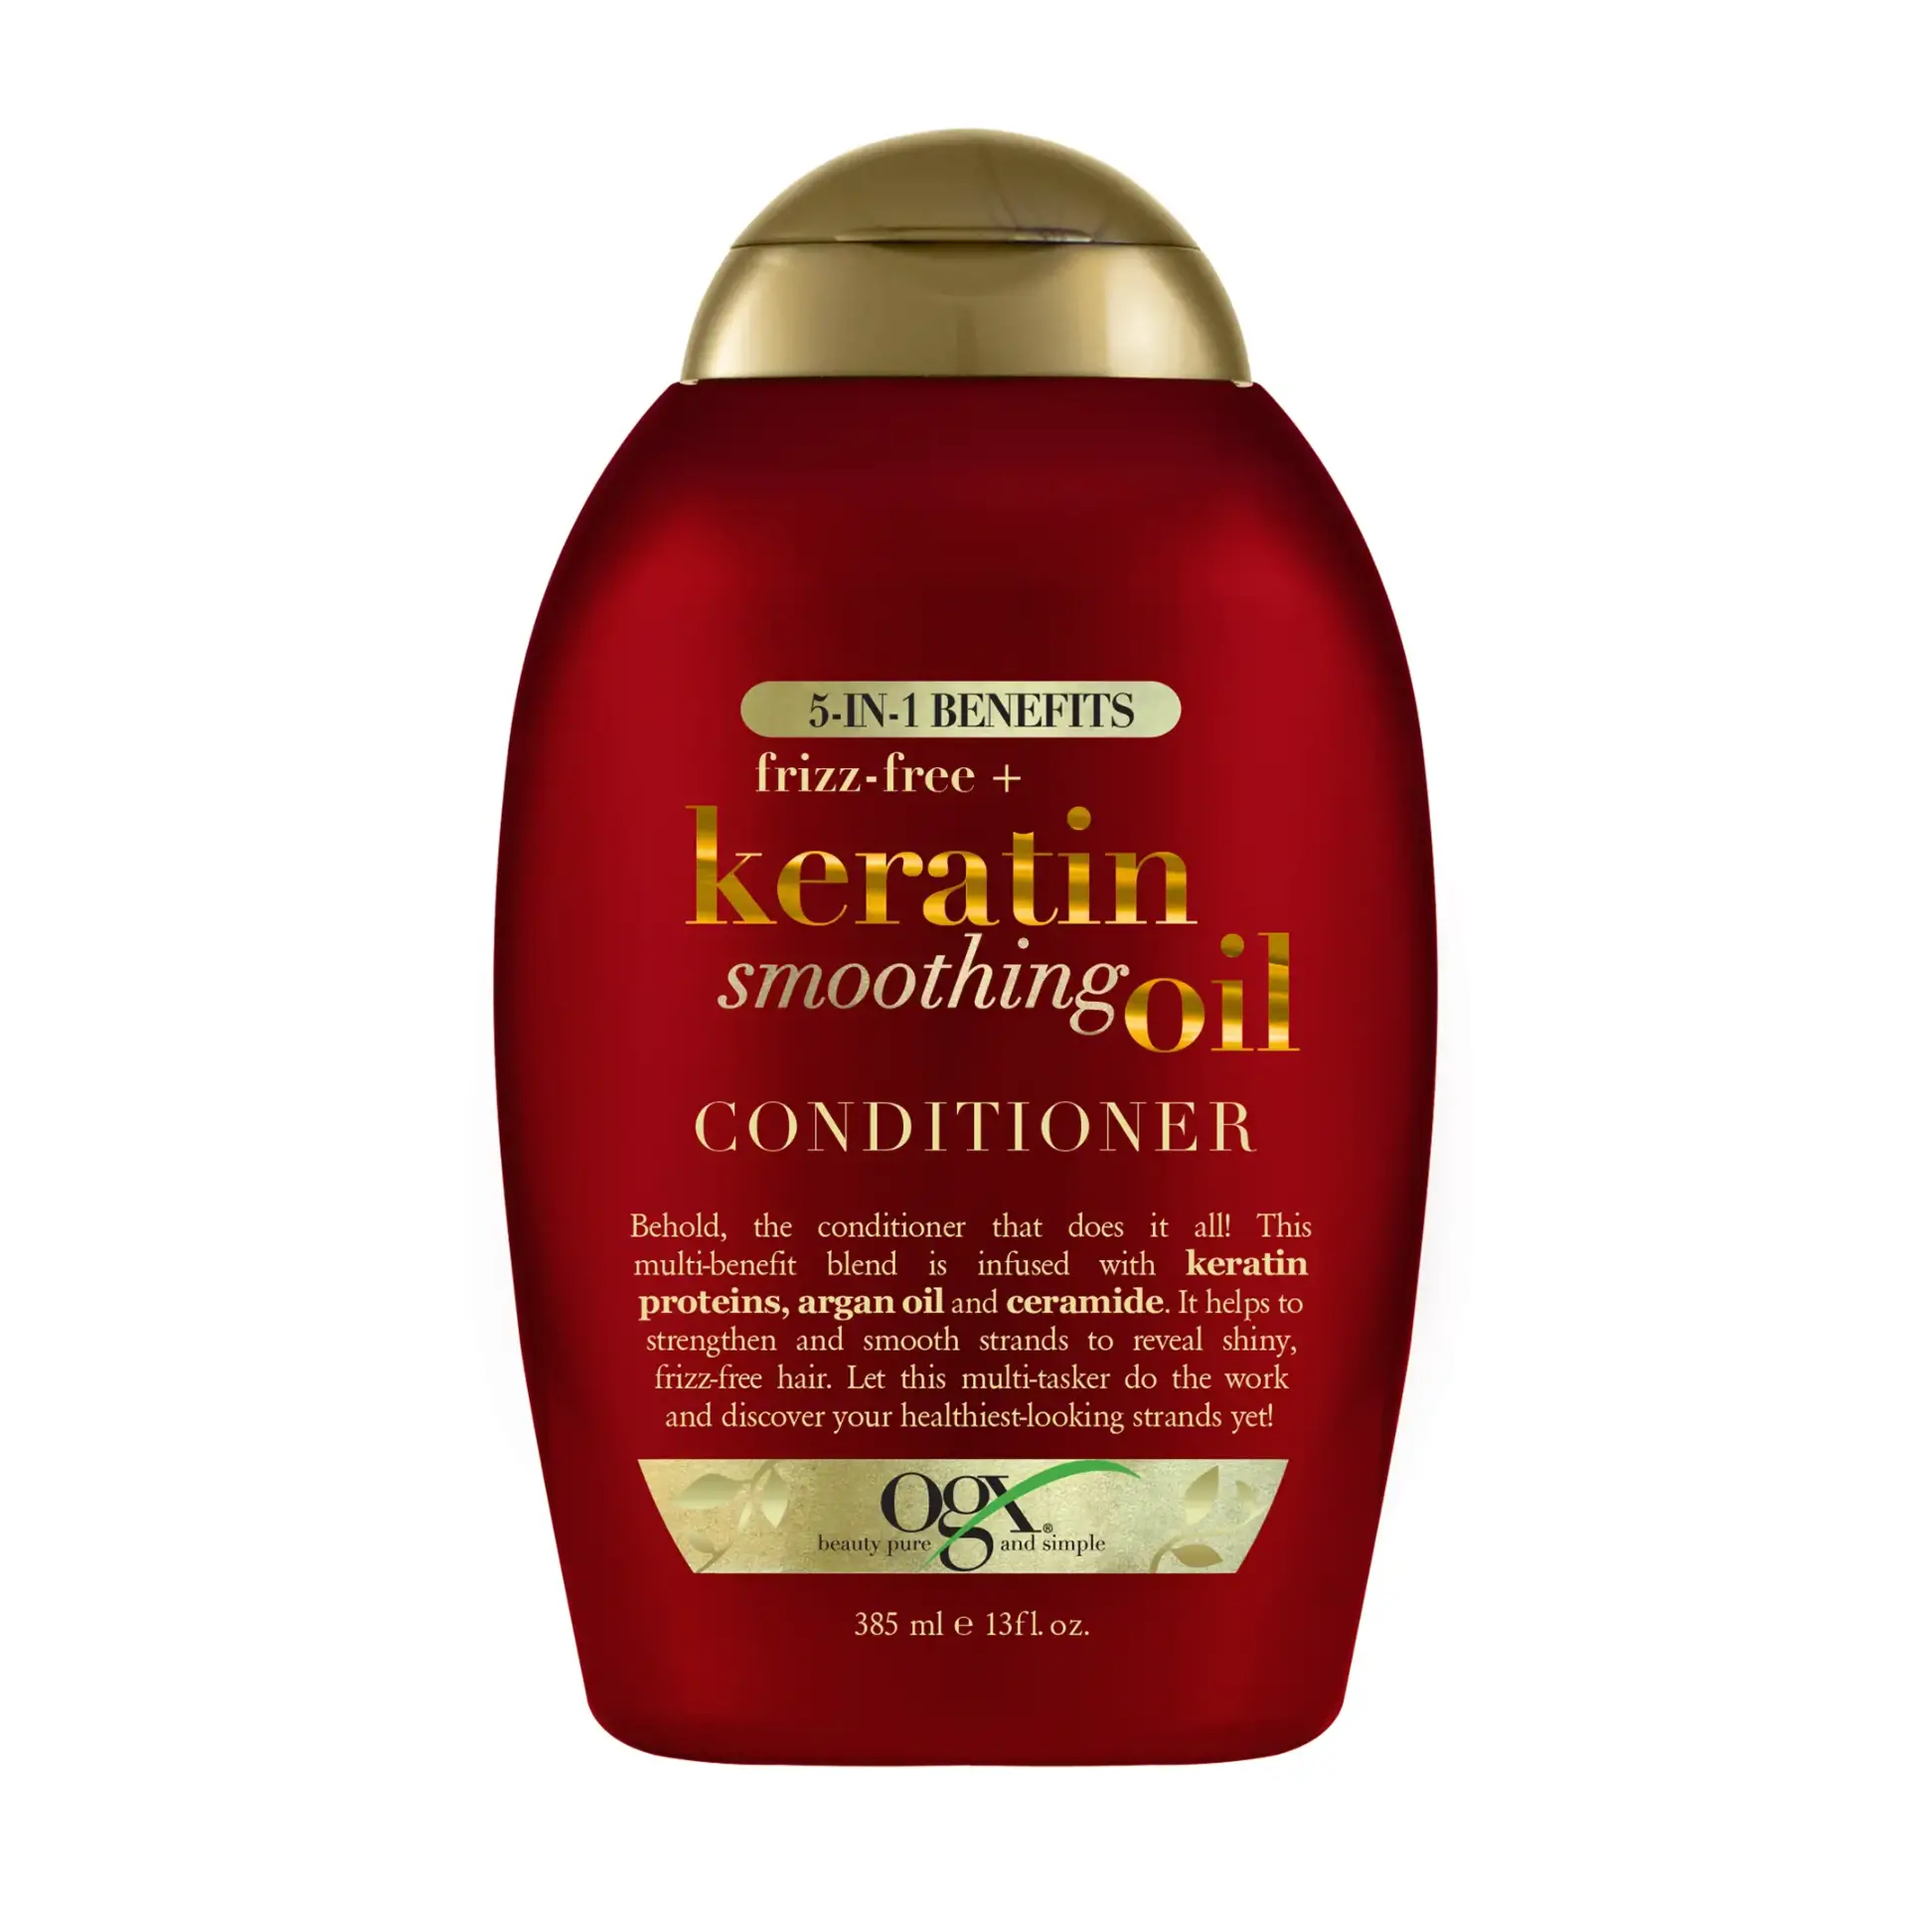 Frizz-Free + Keratin Smoothing Oil Conditioner 13 fl oz